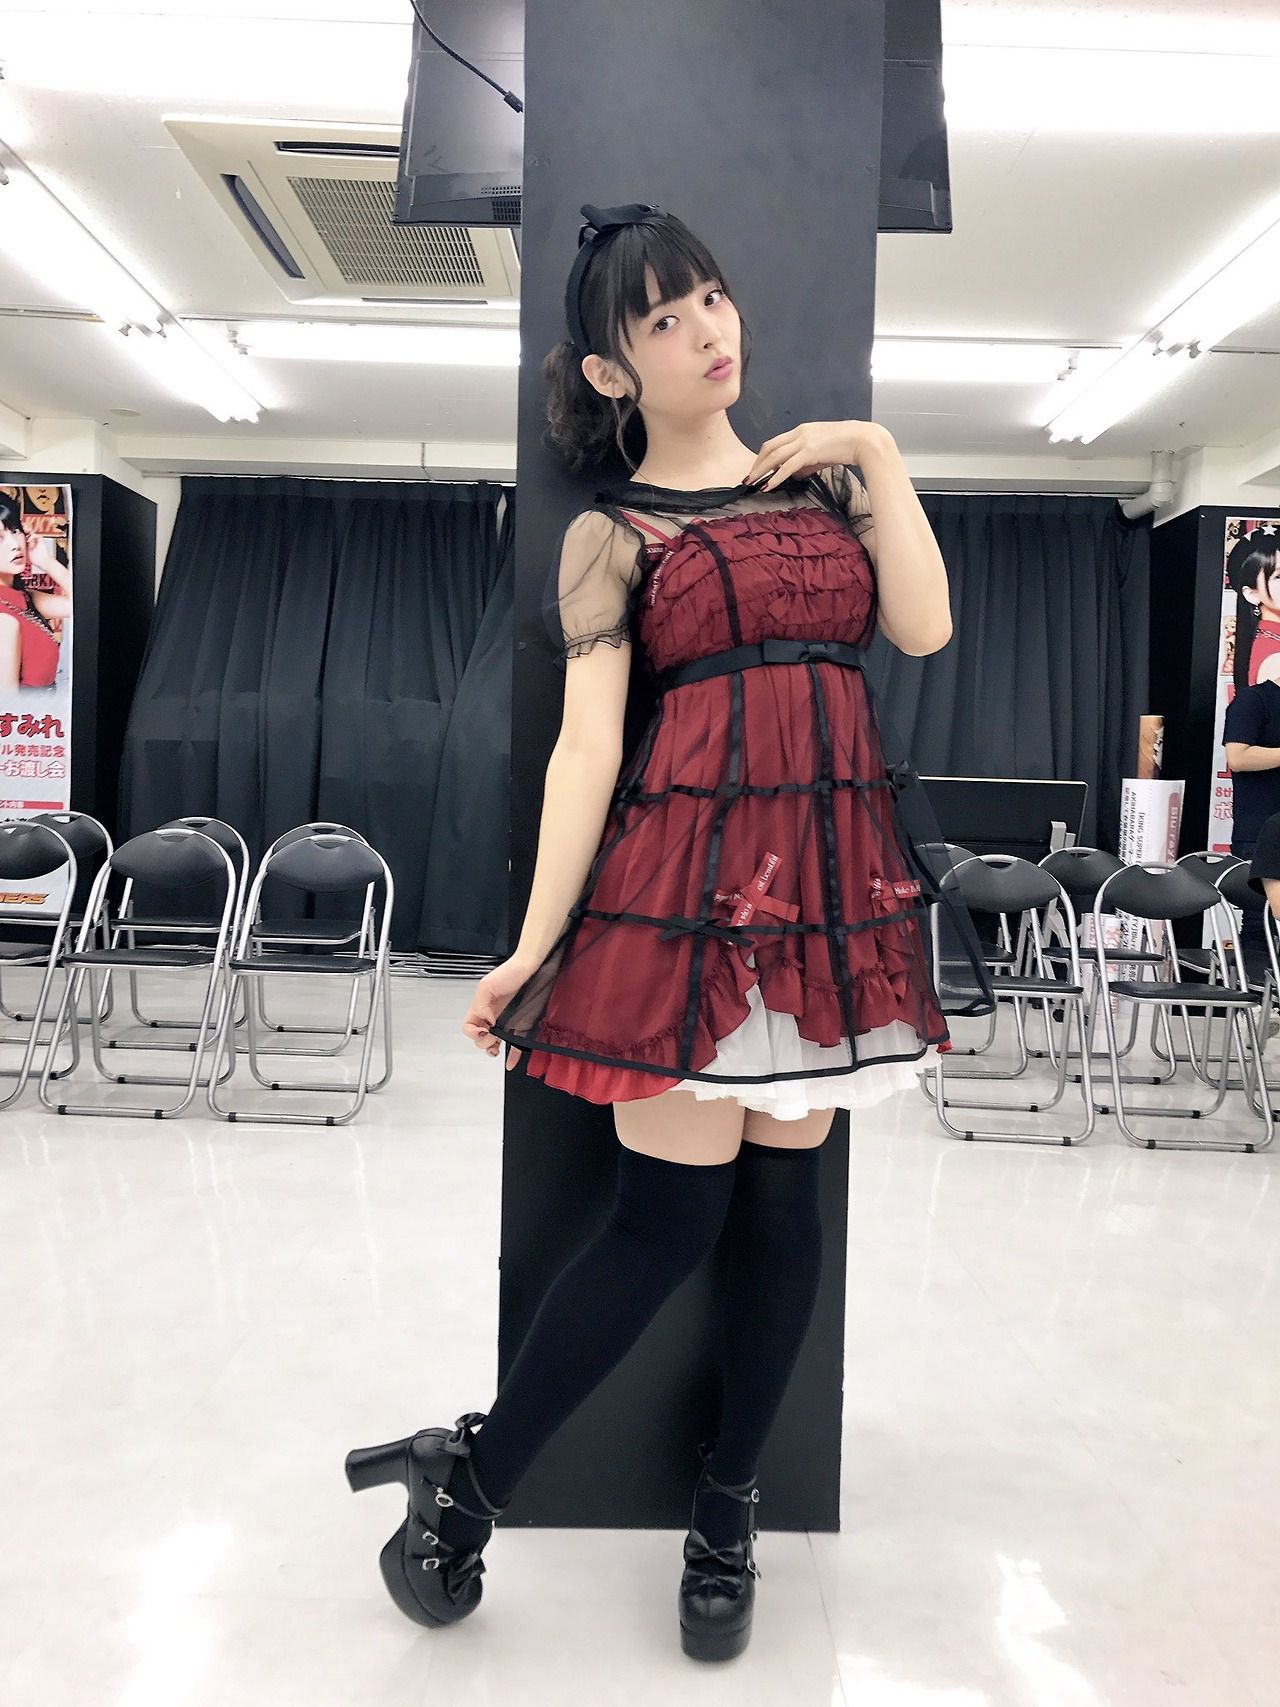 Sumire Uesaka "to emphasize the thigh... W] also erotic image offer Wwwwwww 6